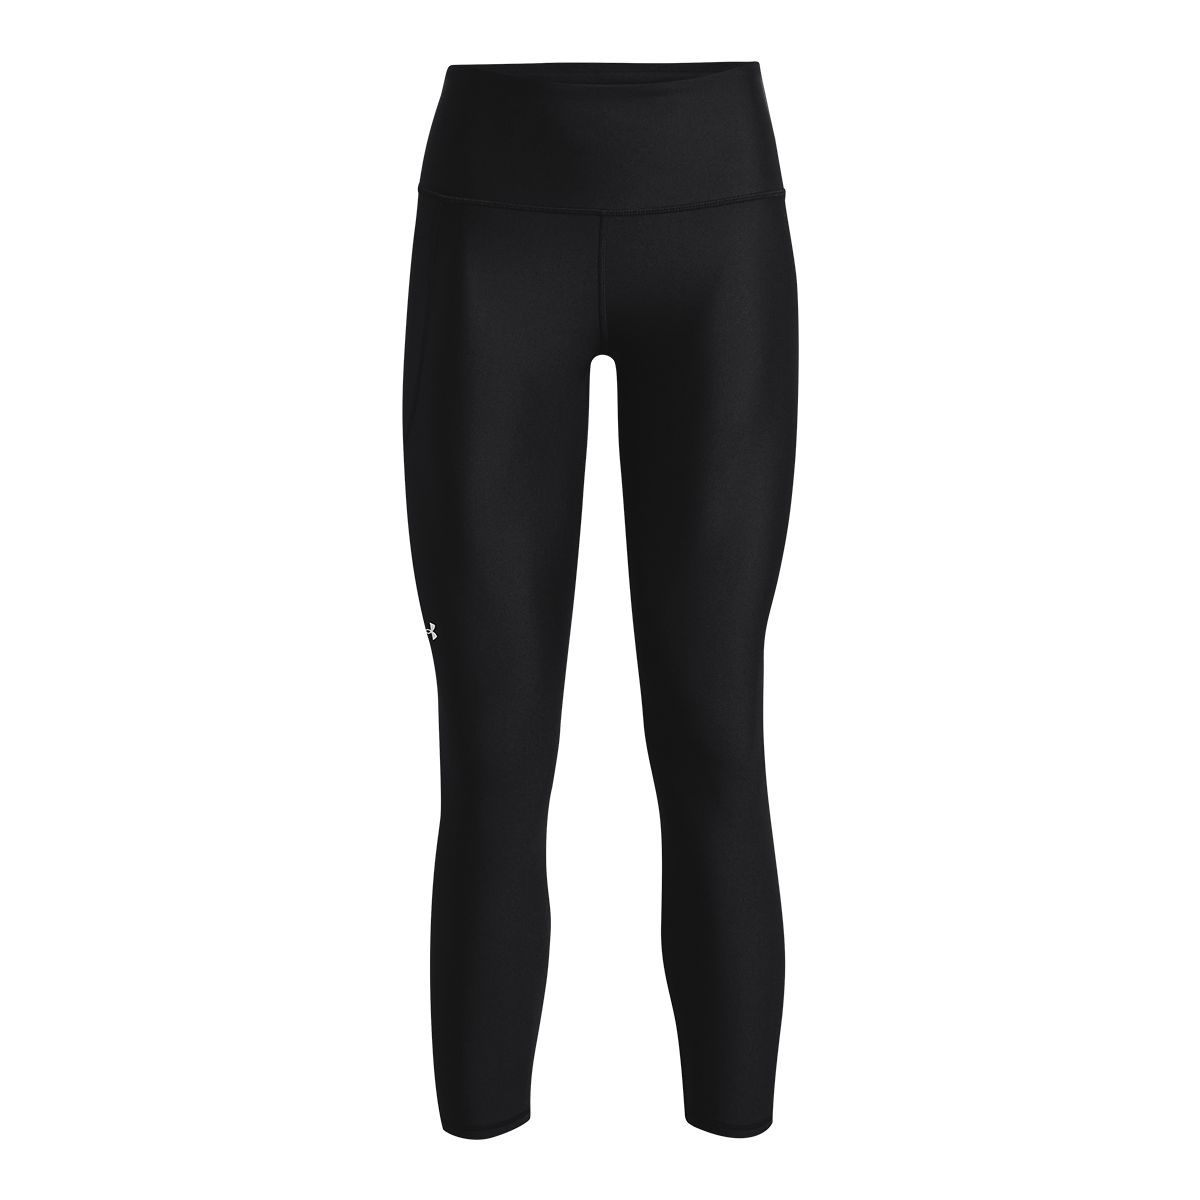 Members mark ladies XL compression ankle length pocketed leggings